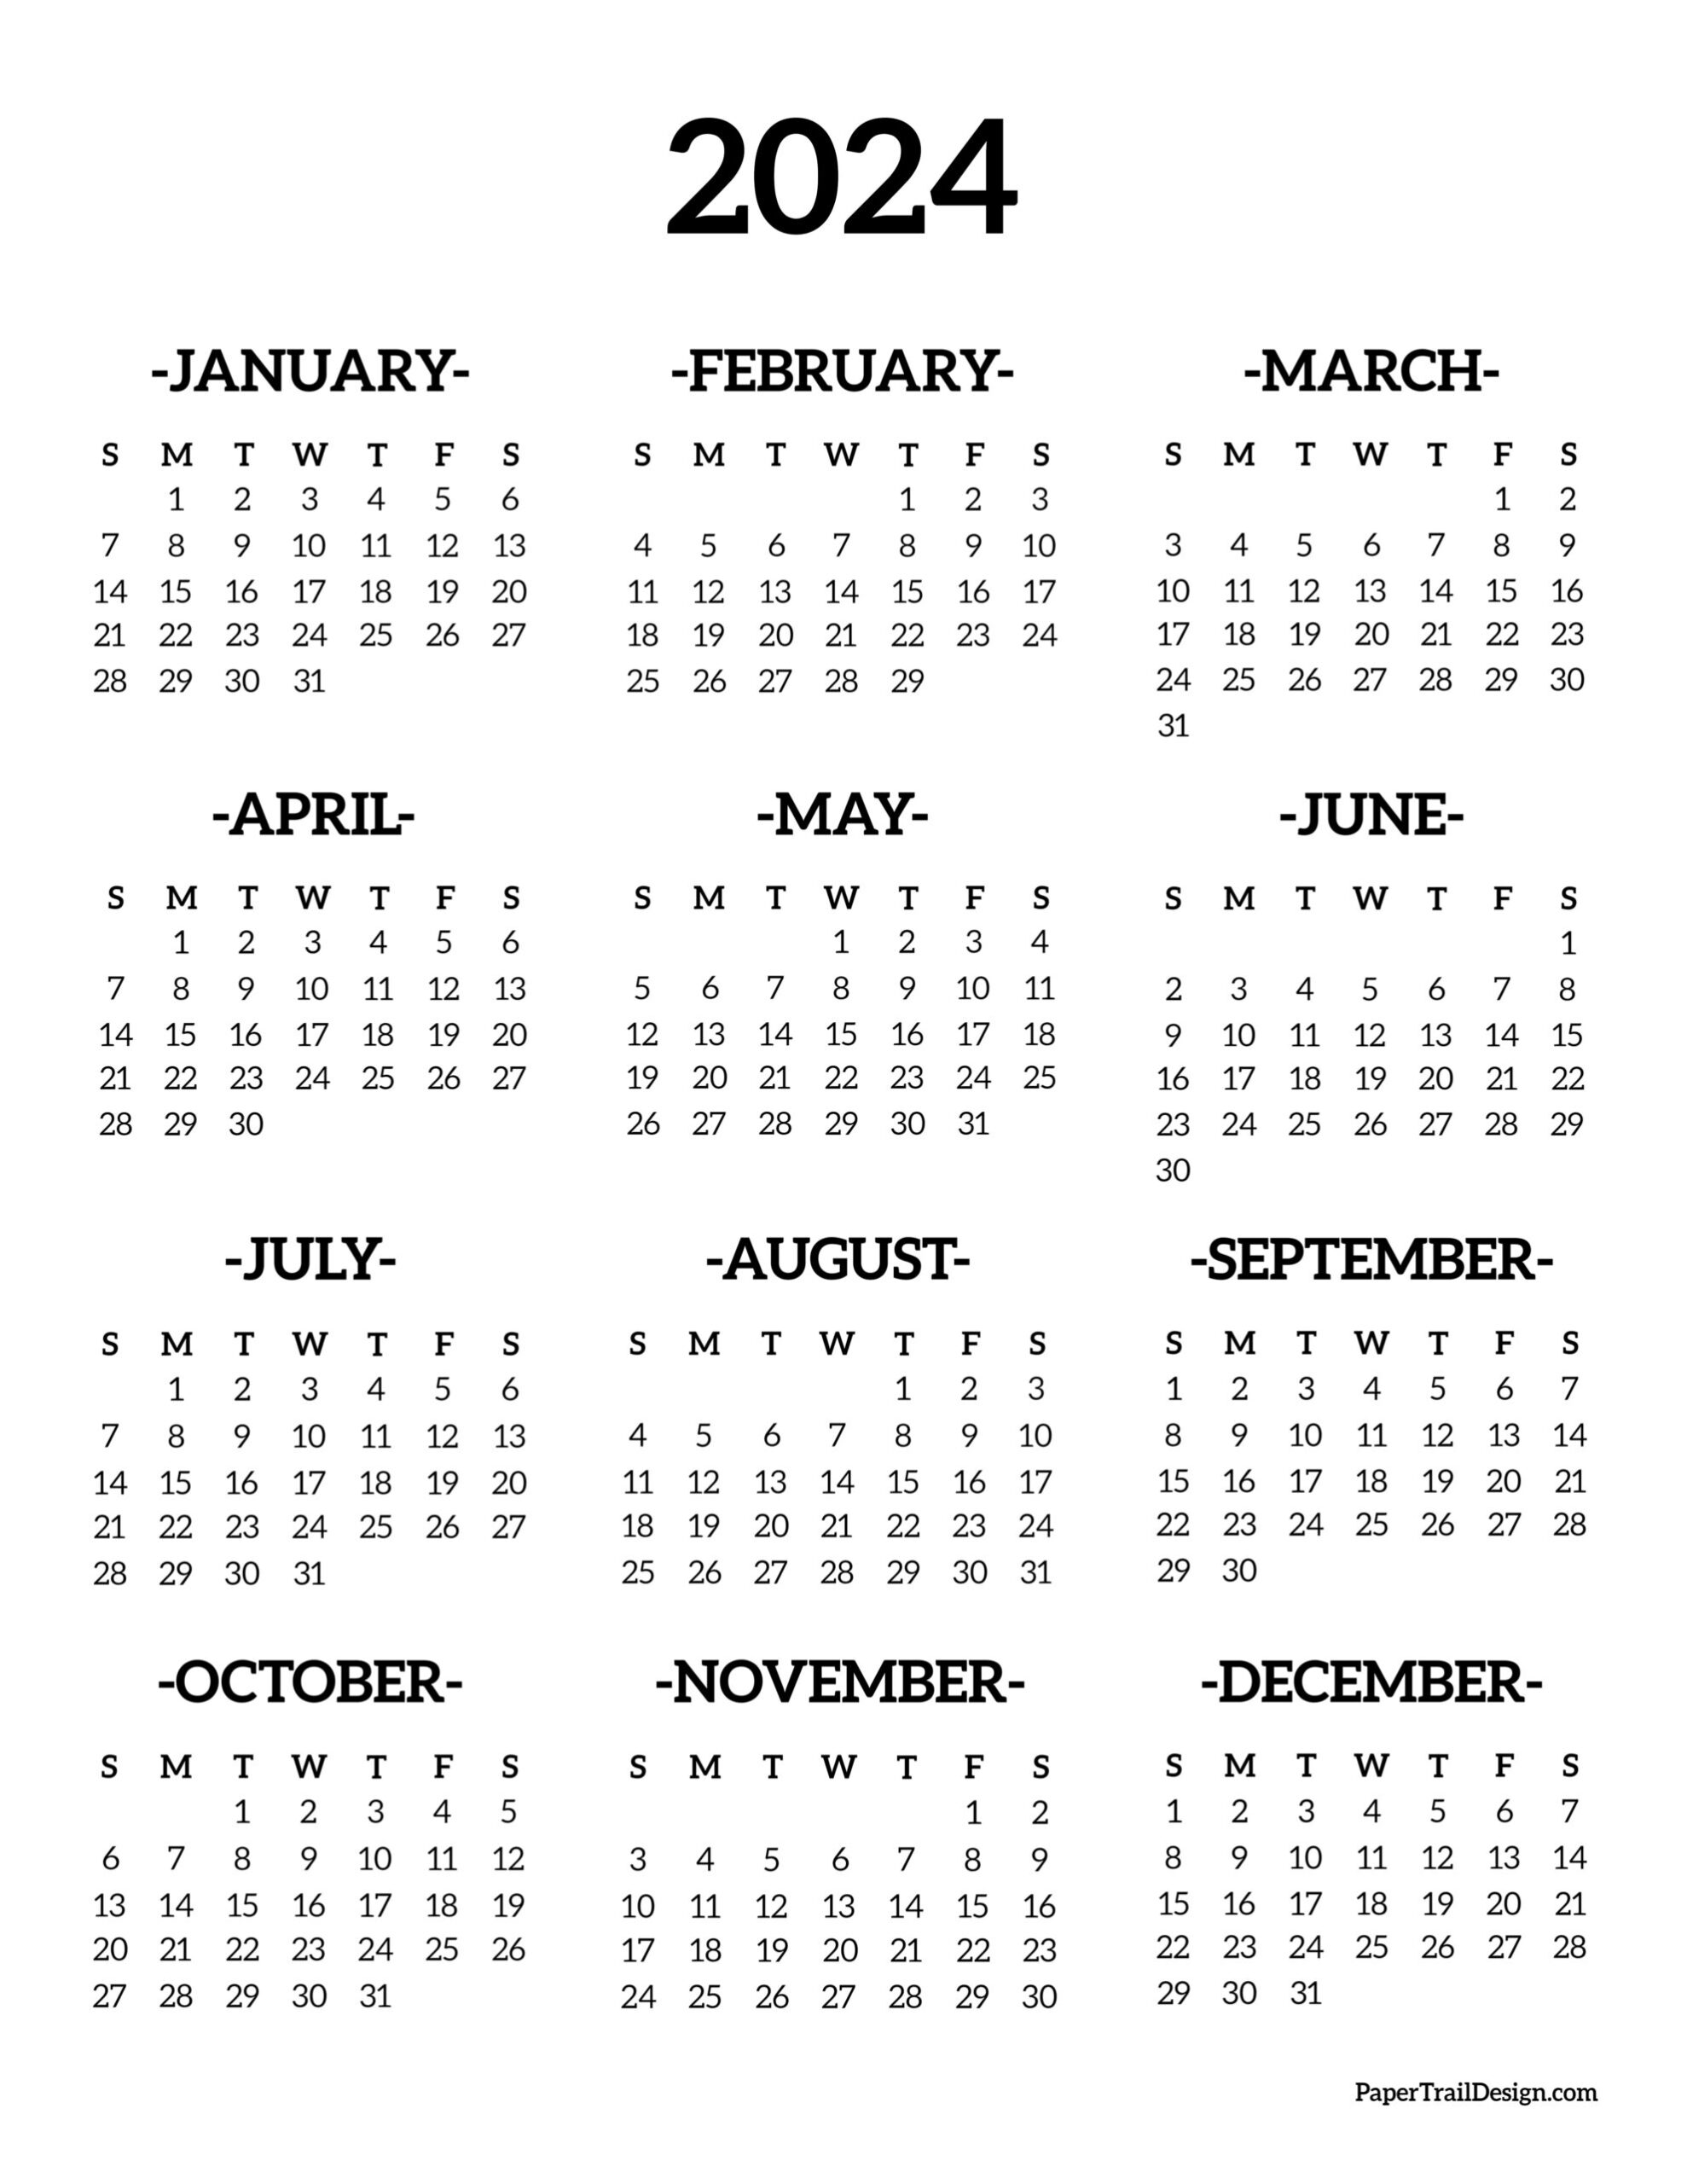 Calendar 2024 Printable One Page - Paper Trail Design for Year At A Glance Calendar 2024 Printable